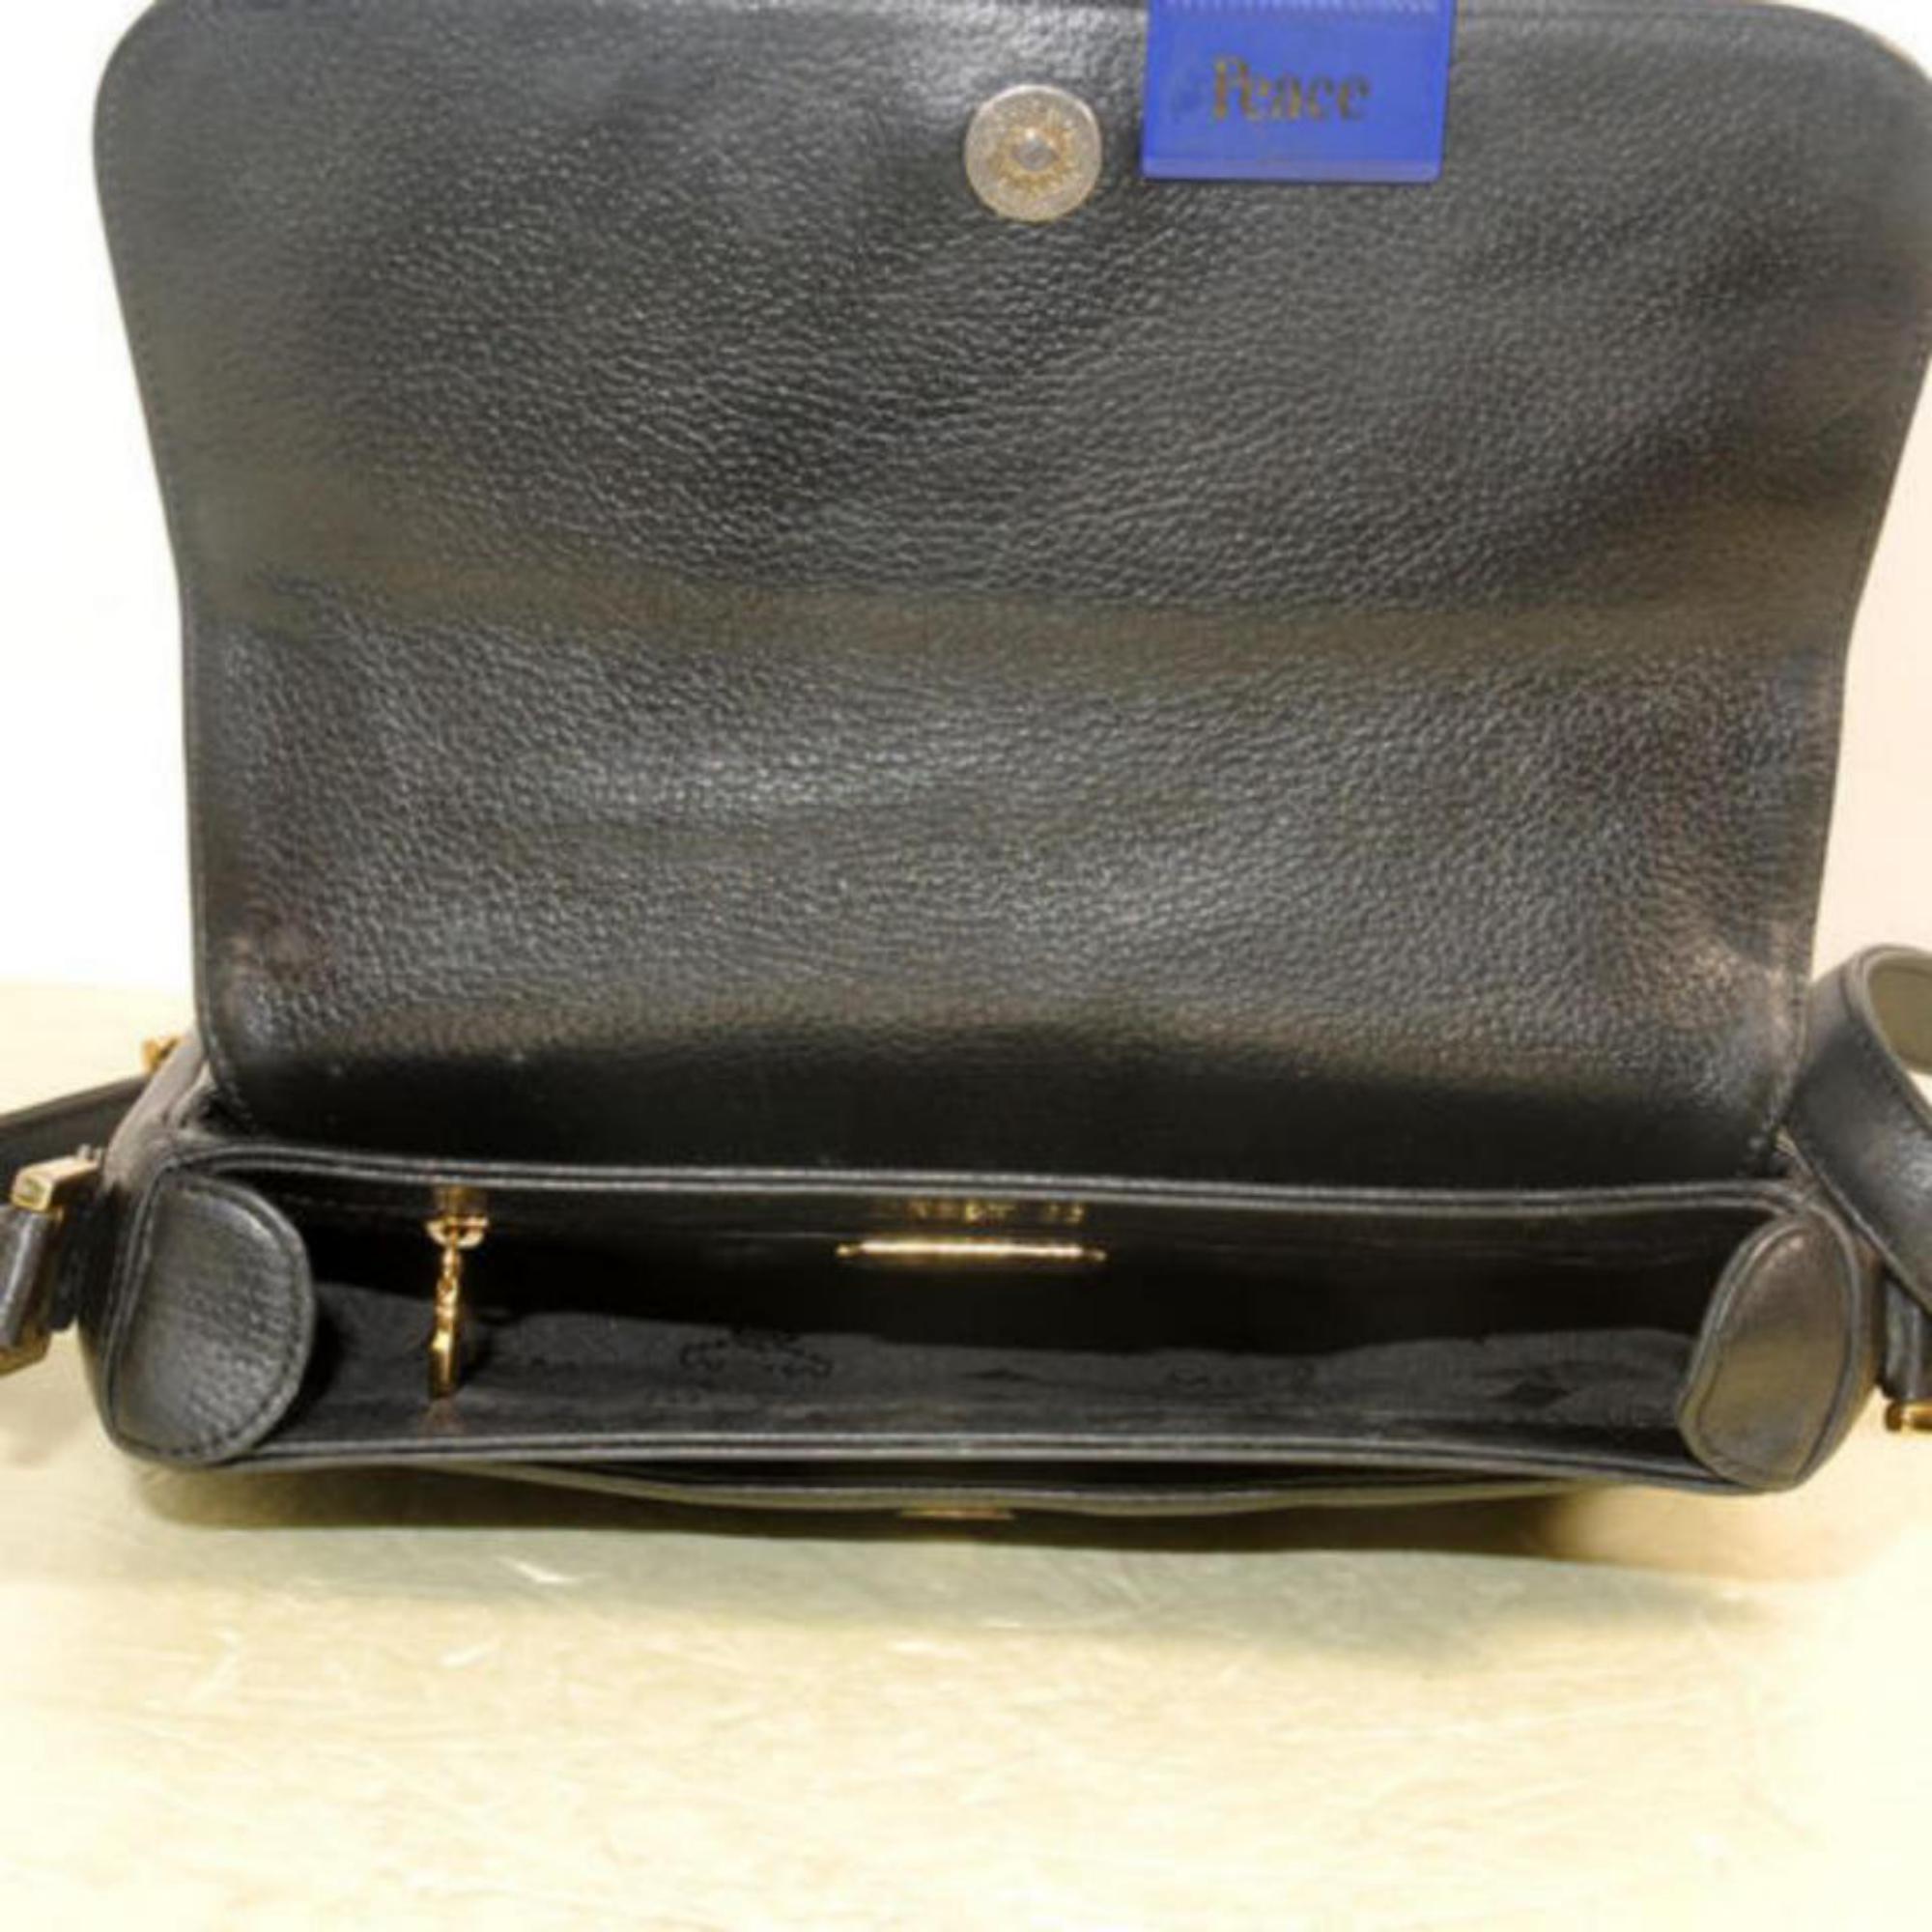 VERY GOOD VINTAGE CONDITION
(7/10 or B)
Includes Dust Bag
This item does not come with any extra accessories.
Please review photos for more details.
Color appearance may vary depending on your monitor settings.
sku : 868503